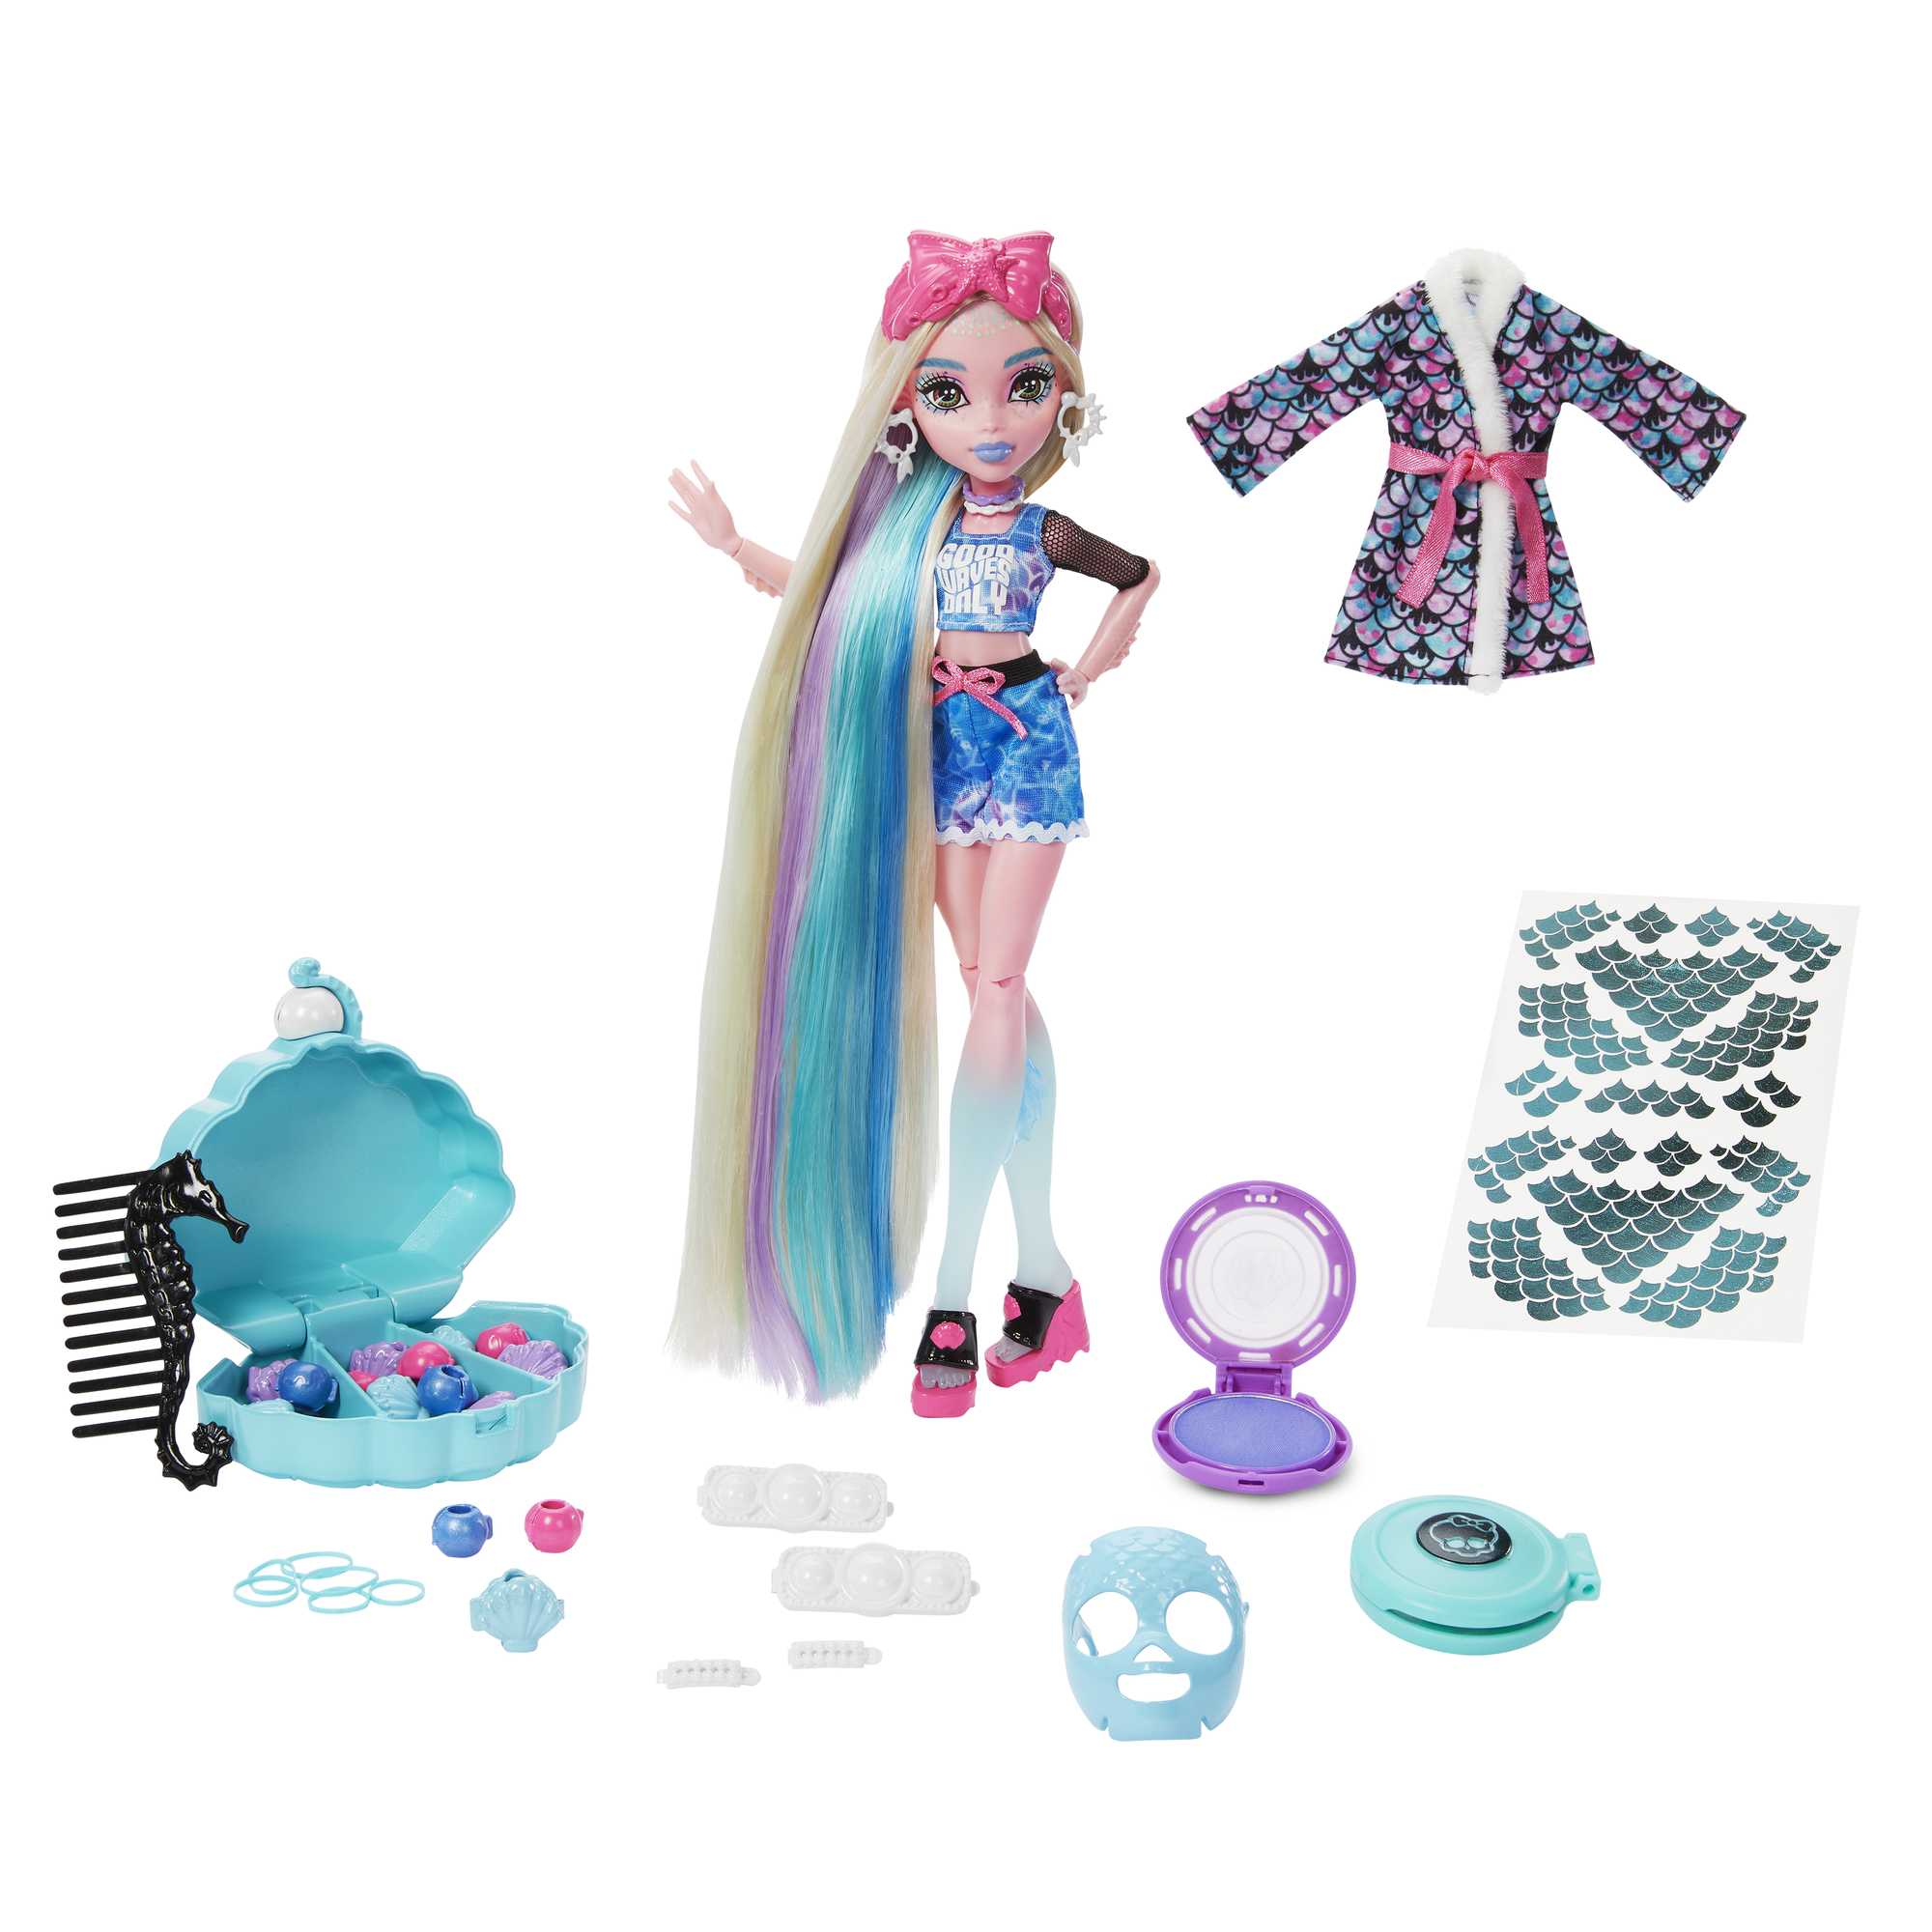 Mattel Fun with Activities featuring Barbie®, Monster High® and